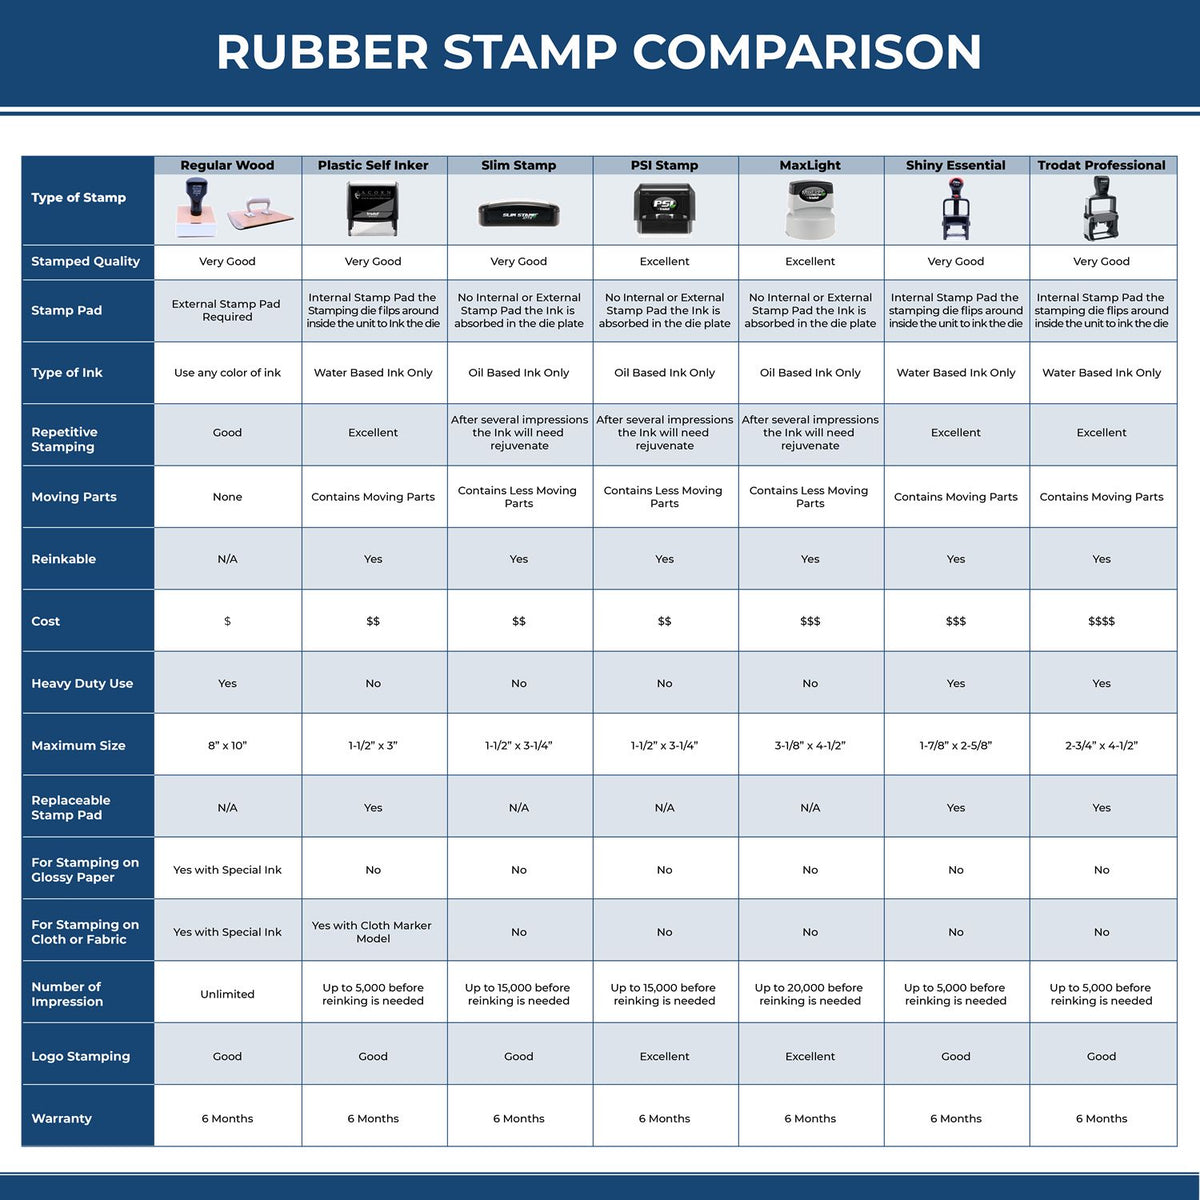 A comparison chart for the different types of mount models available for the Premium MaxLight Pre-Inked Georgia Engineering Stamp.